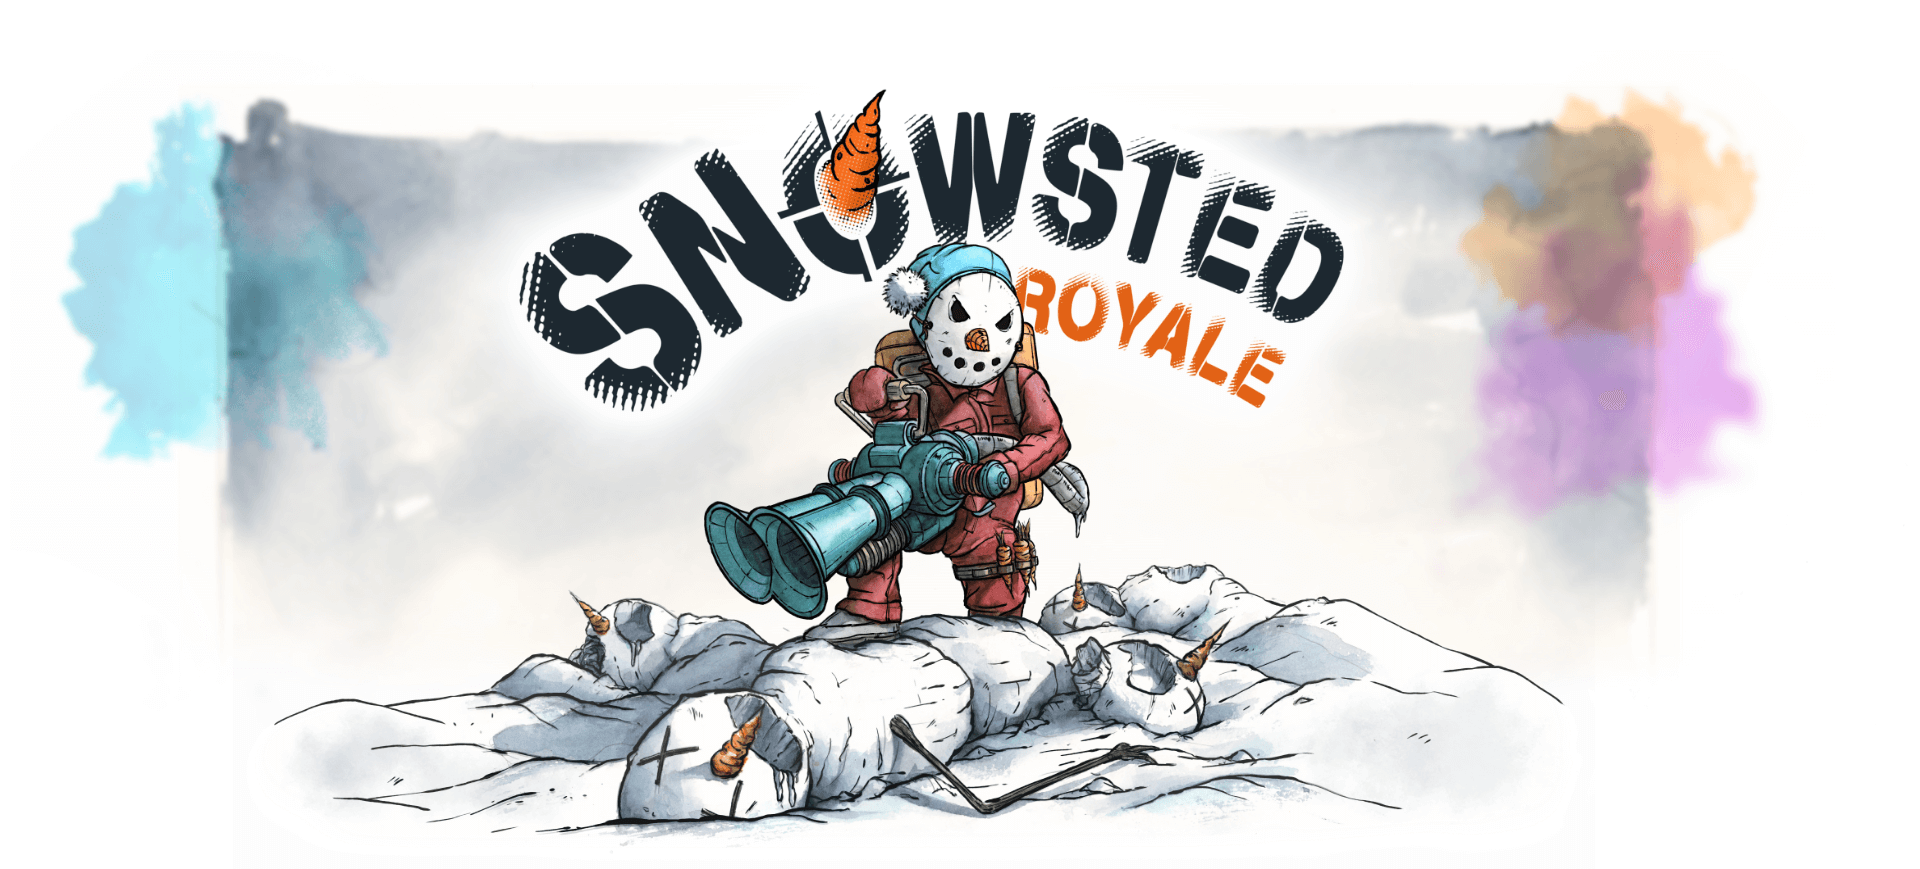 Snowsted Royale 2D Shooter Mobile Game